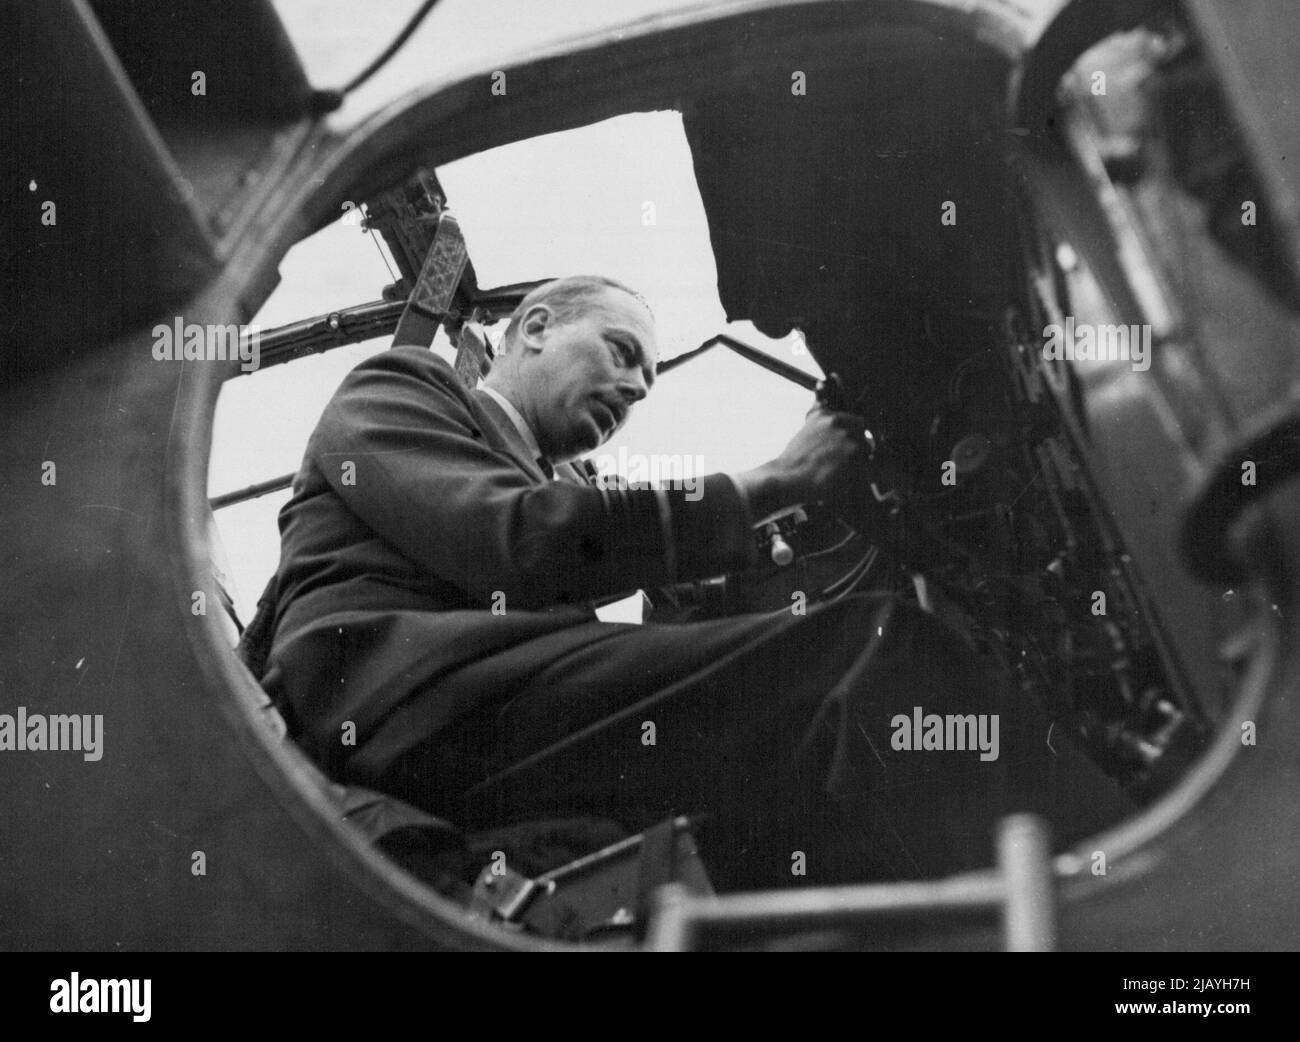 The Duke of Gloucester visits R.A.F. Station in South Wales -- The Duke of Gloucester at he controls of a Mosquito during his visit to an R.A.G. Fighter Station. Air Marshal H.R.H. The Duke of Gloucester visited R.A.F. Stations in South Wales, recently. He travelled by air and was accompanied by group captain Lord Willoughby De Broke, M.C. A.F.C., Deputy director of public relations, Air Ministry. August 30, 1943. (Photo by L.N.A.). Stock Photo